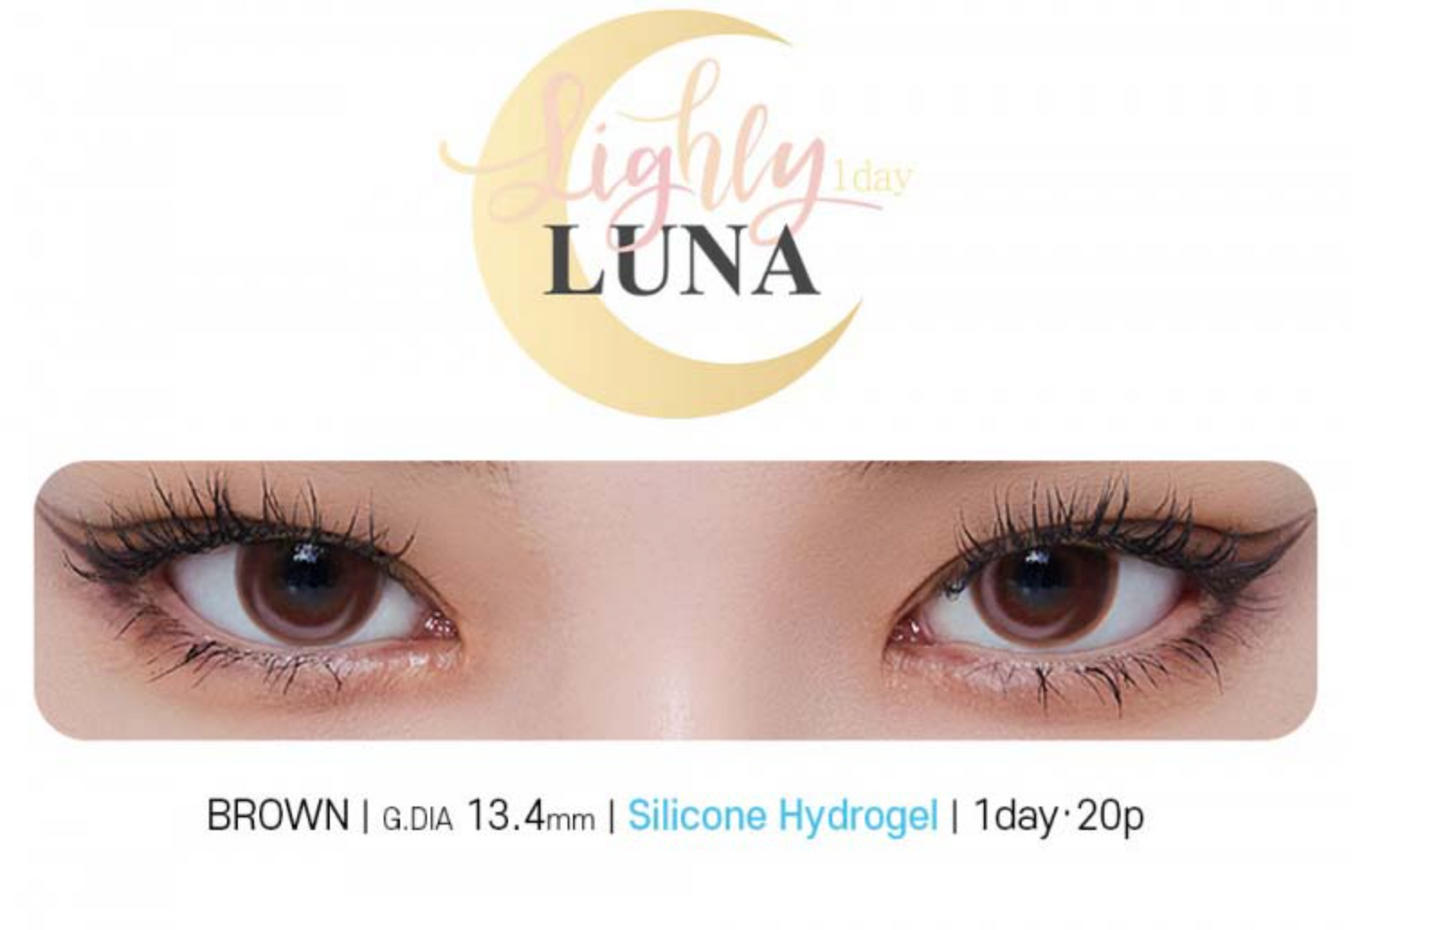 [Order Price] LENSTOWN LIGHLY LUNA - BROWN Daily Disposable/20 Tablets 